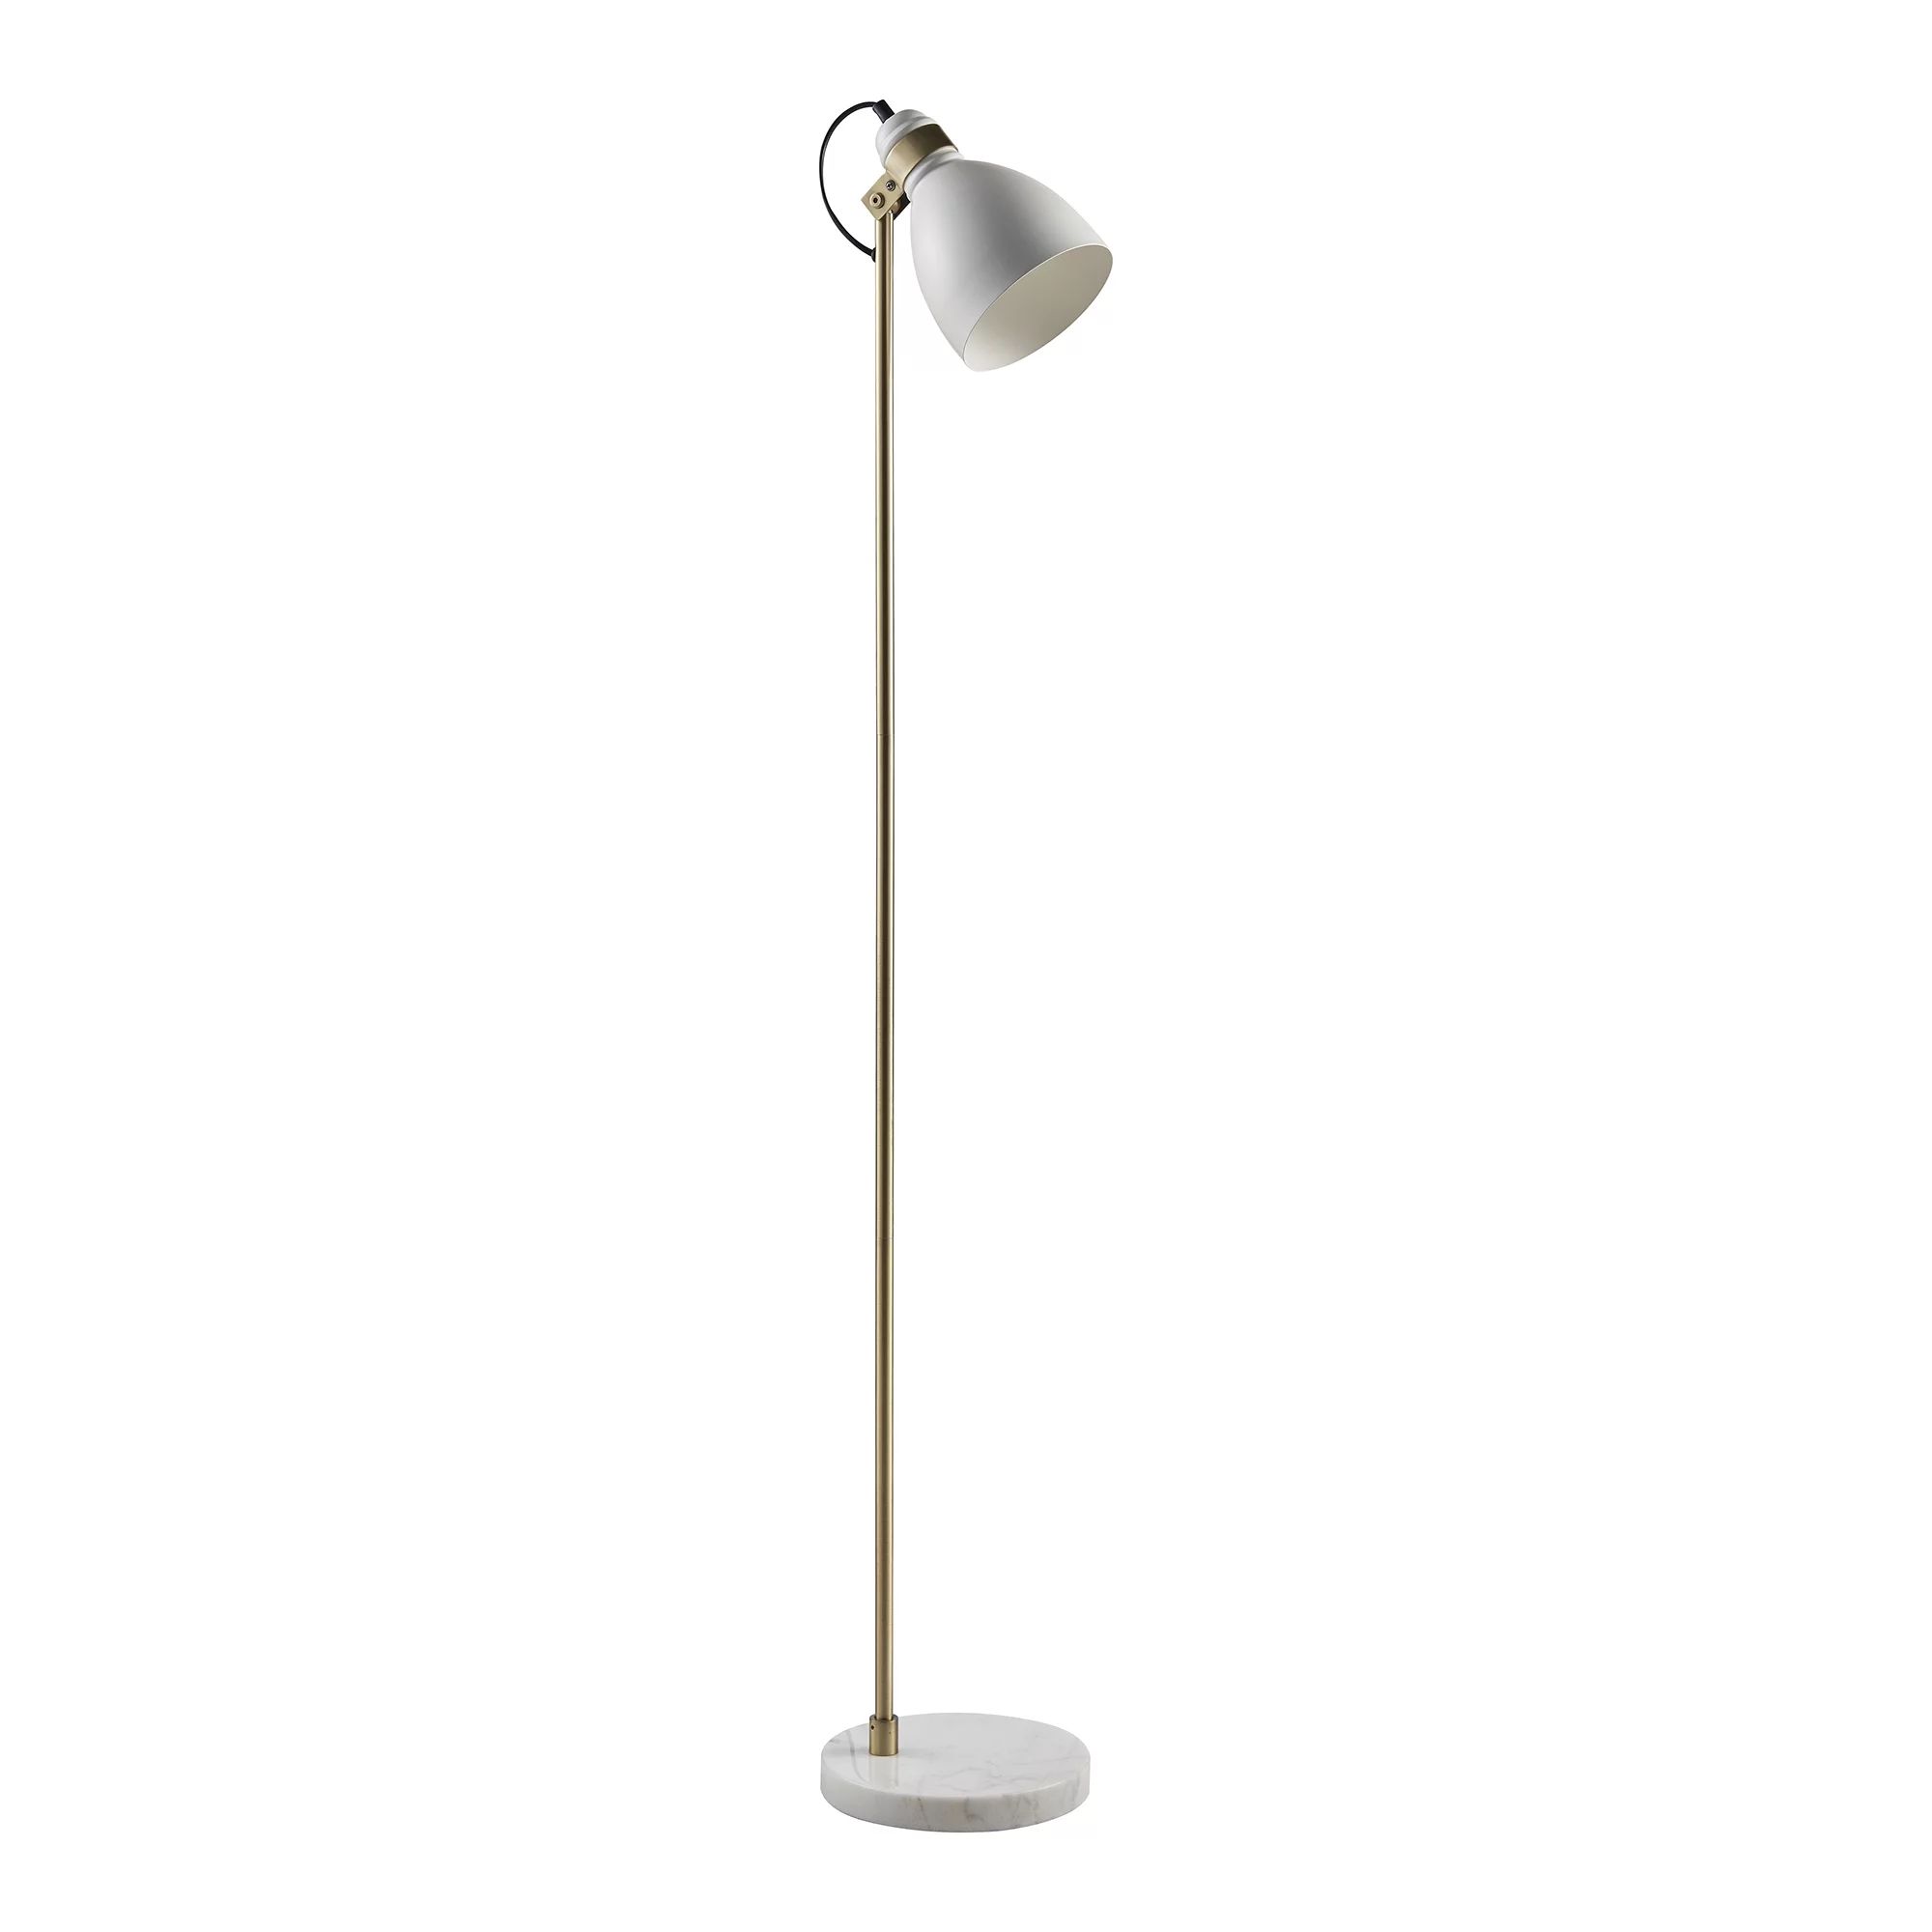 Versanora - Quincy Floor Lamp with Real White Marble Base - White/Antique Brass | Walmart (US)